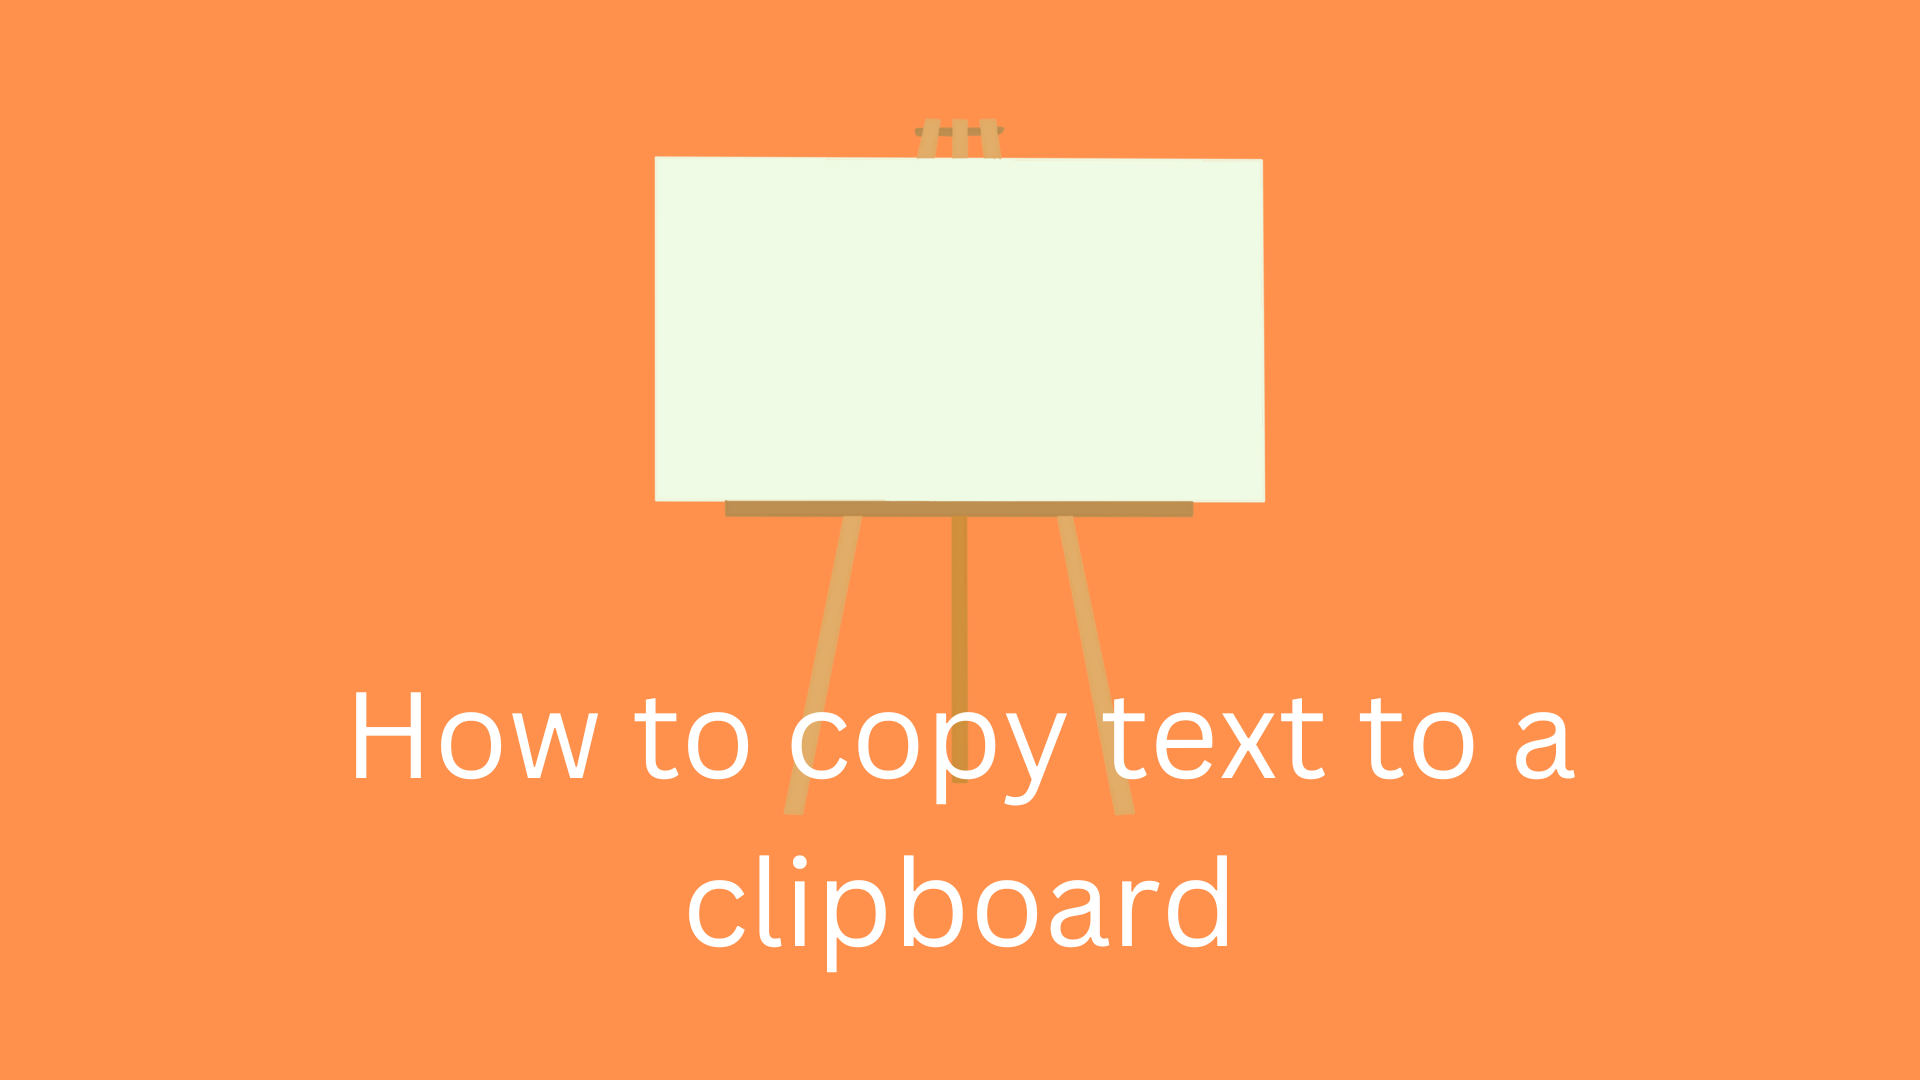 How to copy text to a clipboard